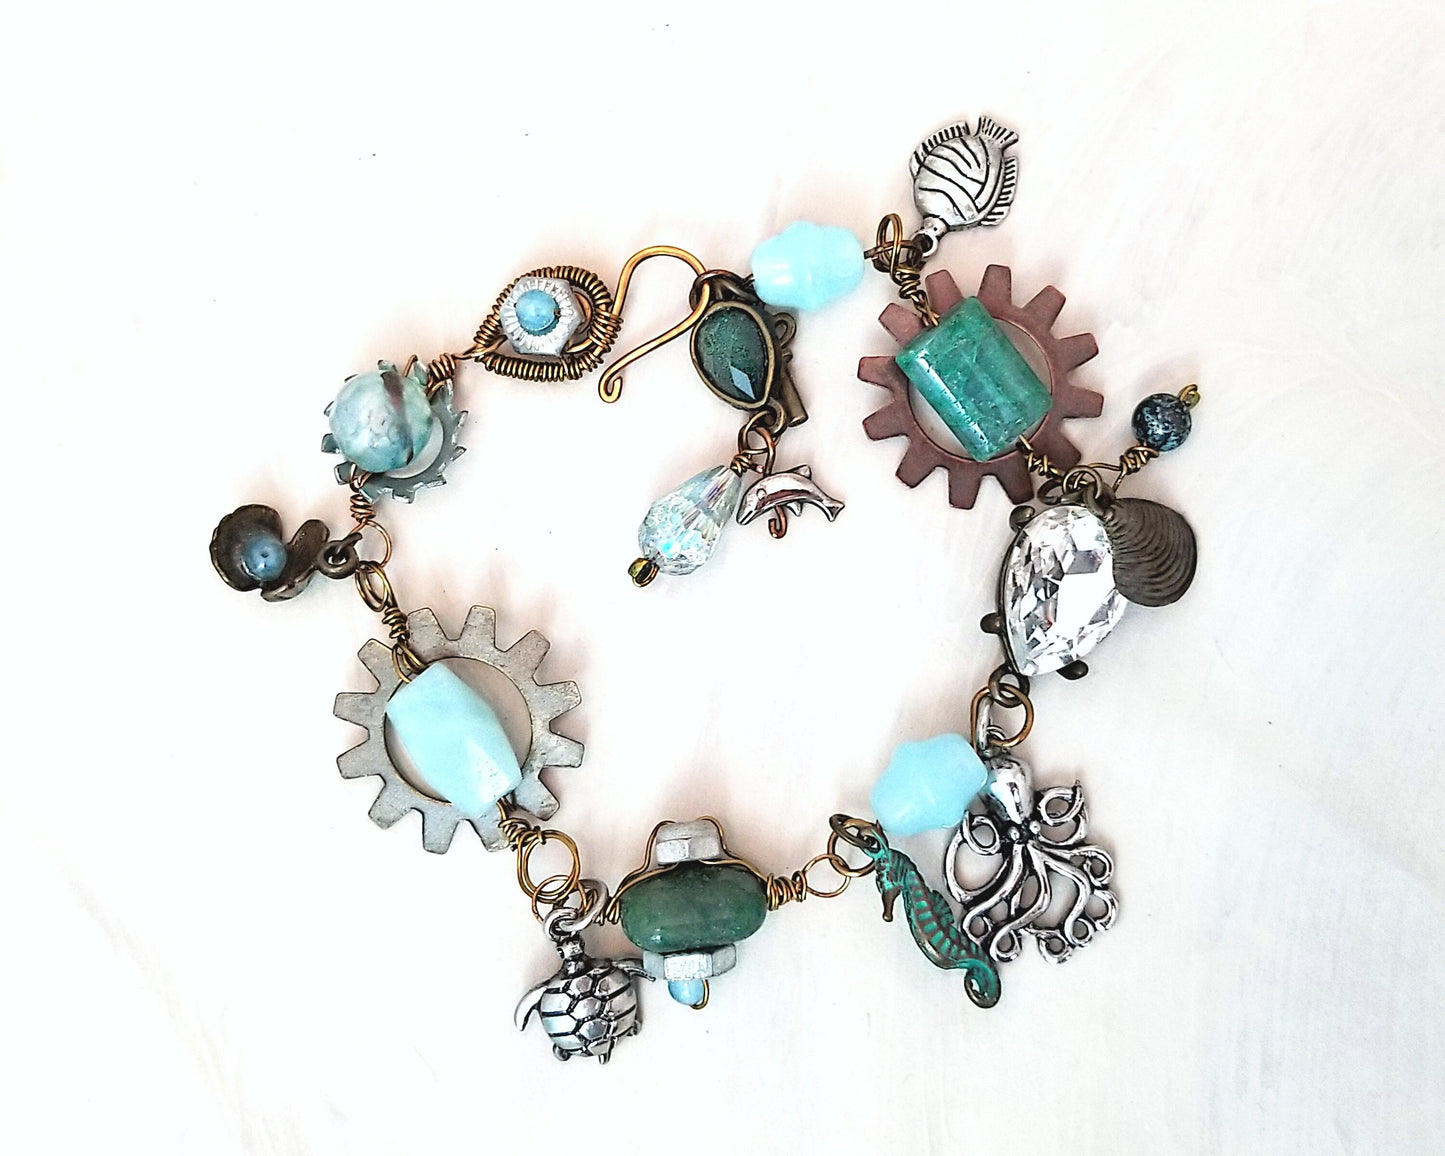 Steampunk Octopus Bracelet in Aqua/Teal/Sea Blue with Glass & Stone Beads and Real Hardware